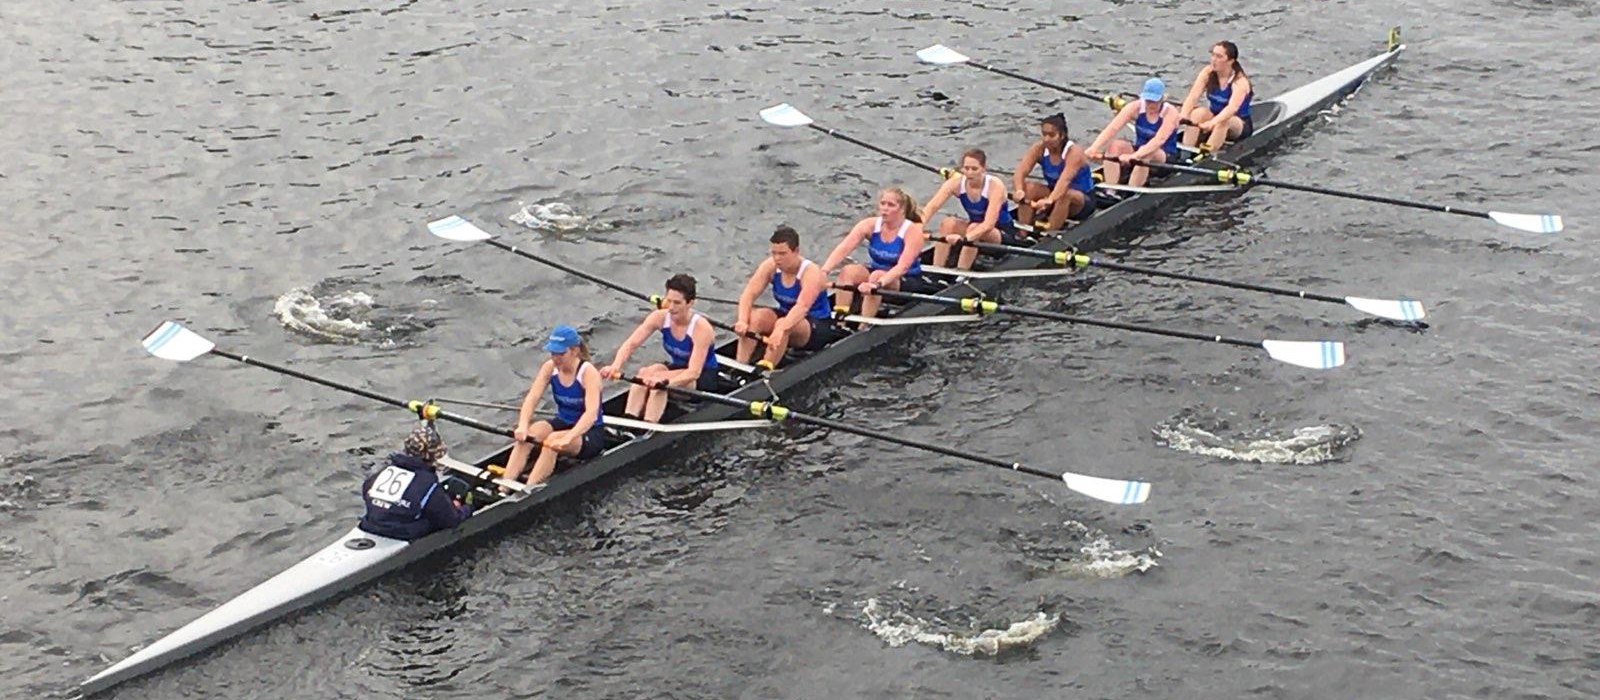 Rowing Places 14th at Head of the Charles Regatta; Best Finish Since 2011